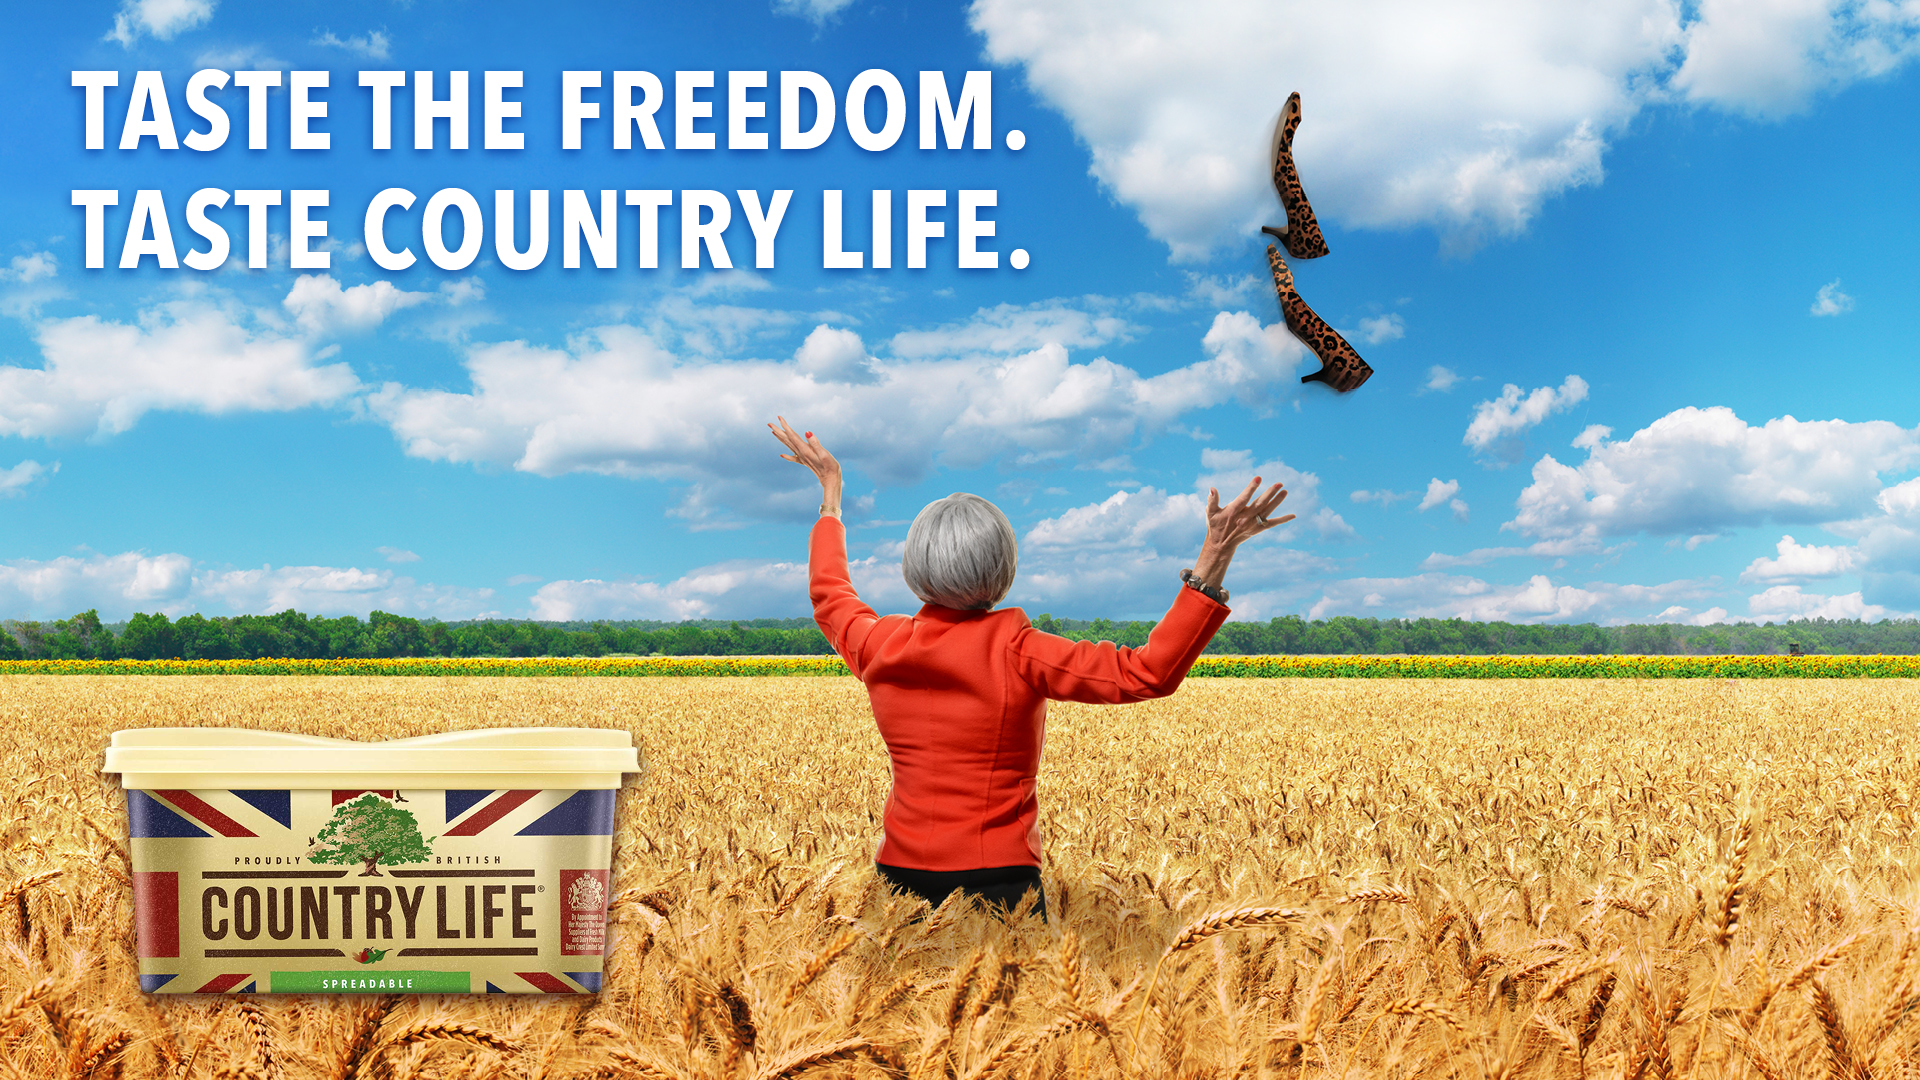 Country Life unveils digital campaign